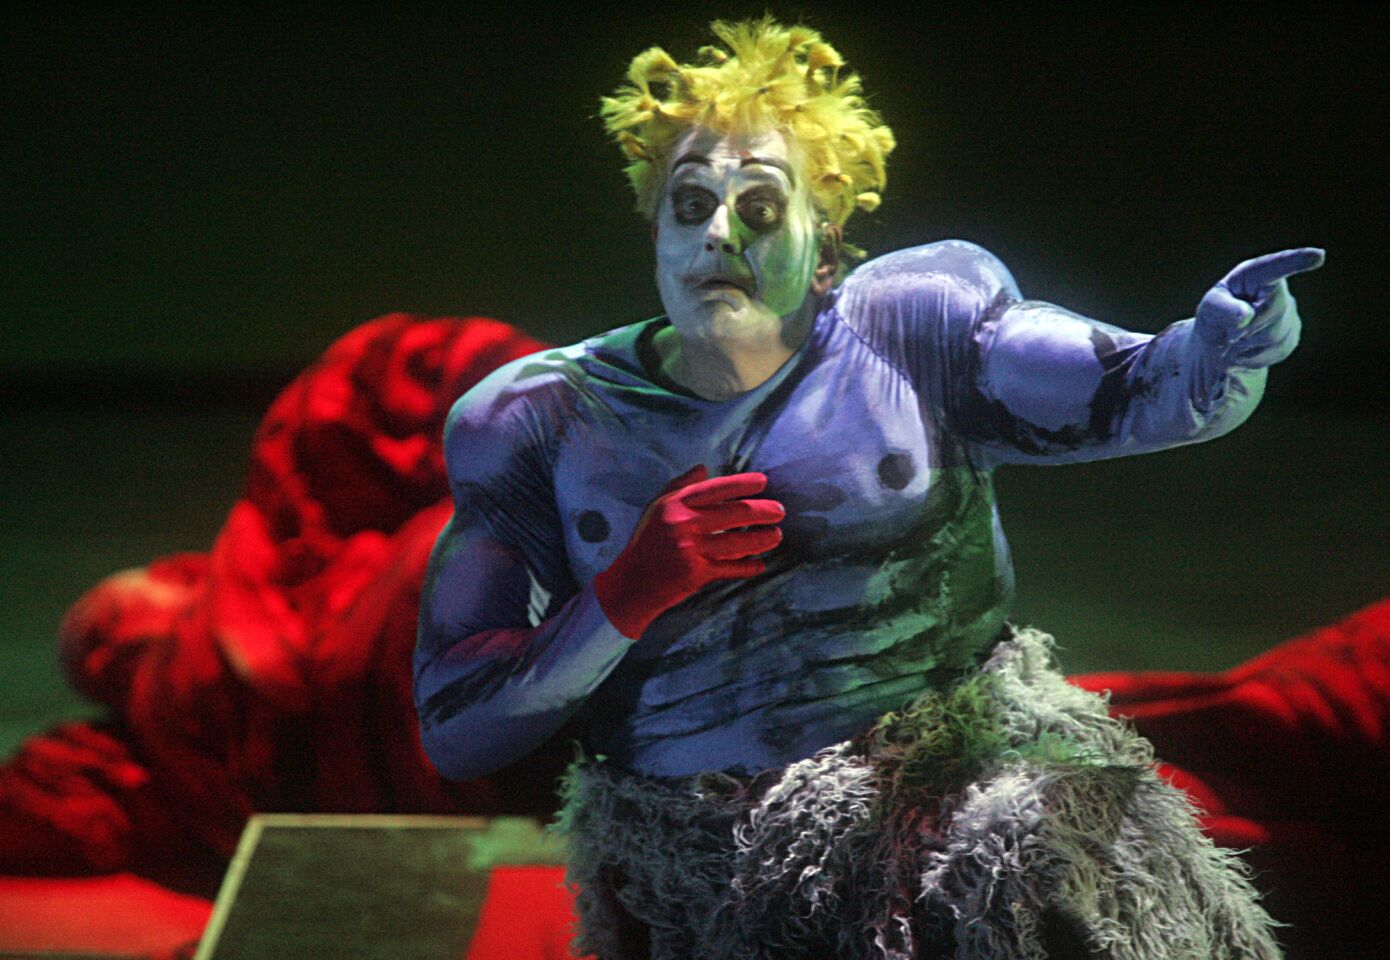 The company staged its first-ever production of Wagner's "Ring" cycle operas starting in 2009. The productions, directed by Achim Freyer, came with a price tag of $31 million and proved to be critically divisive and controversial.